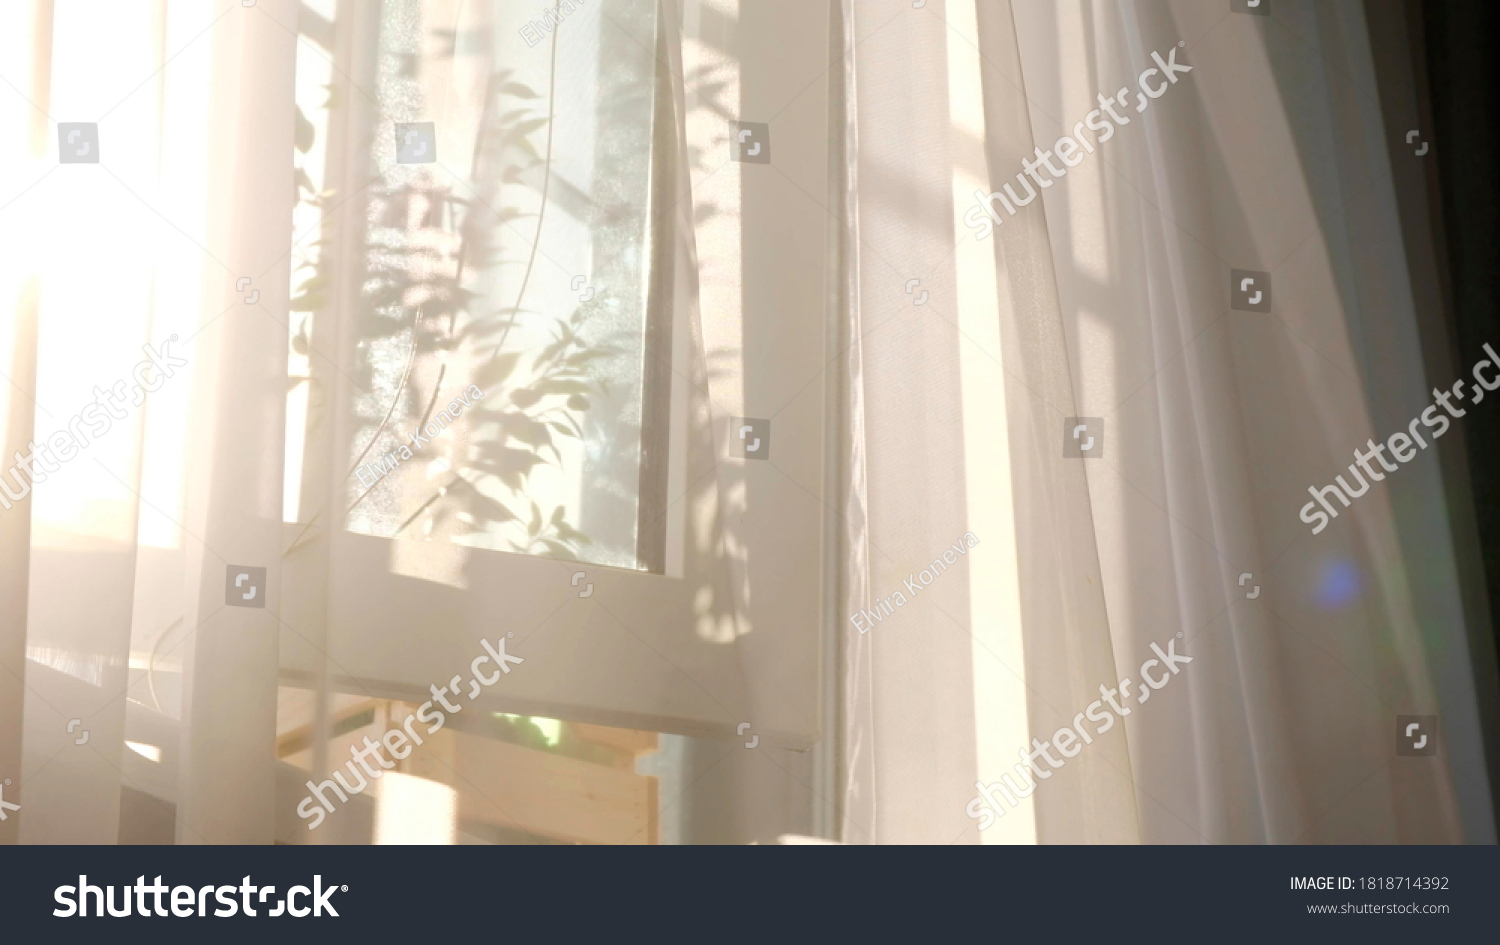 wind blows through the open window in the room. Waving white tulle near the window. Morning sun lighting the room, shadow background overlays. #1818714392